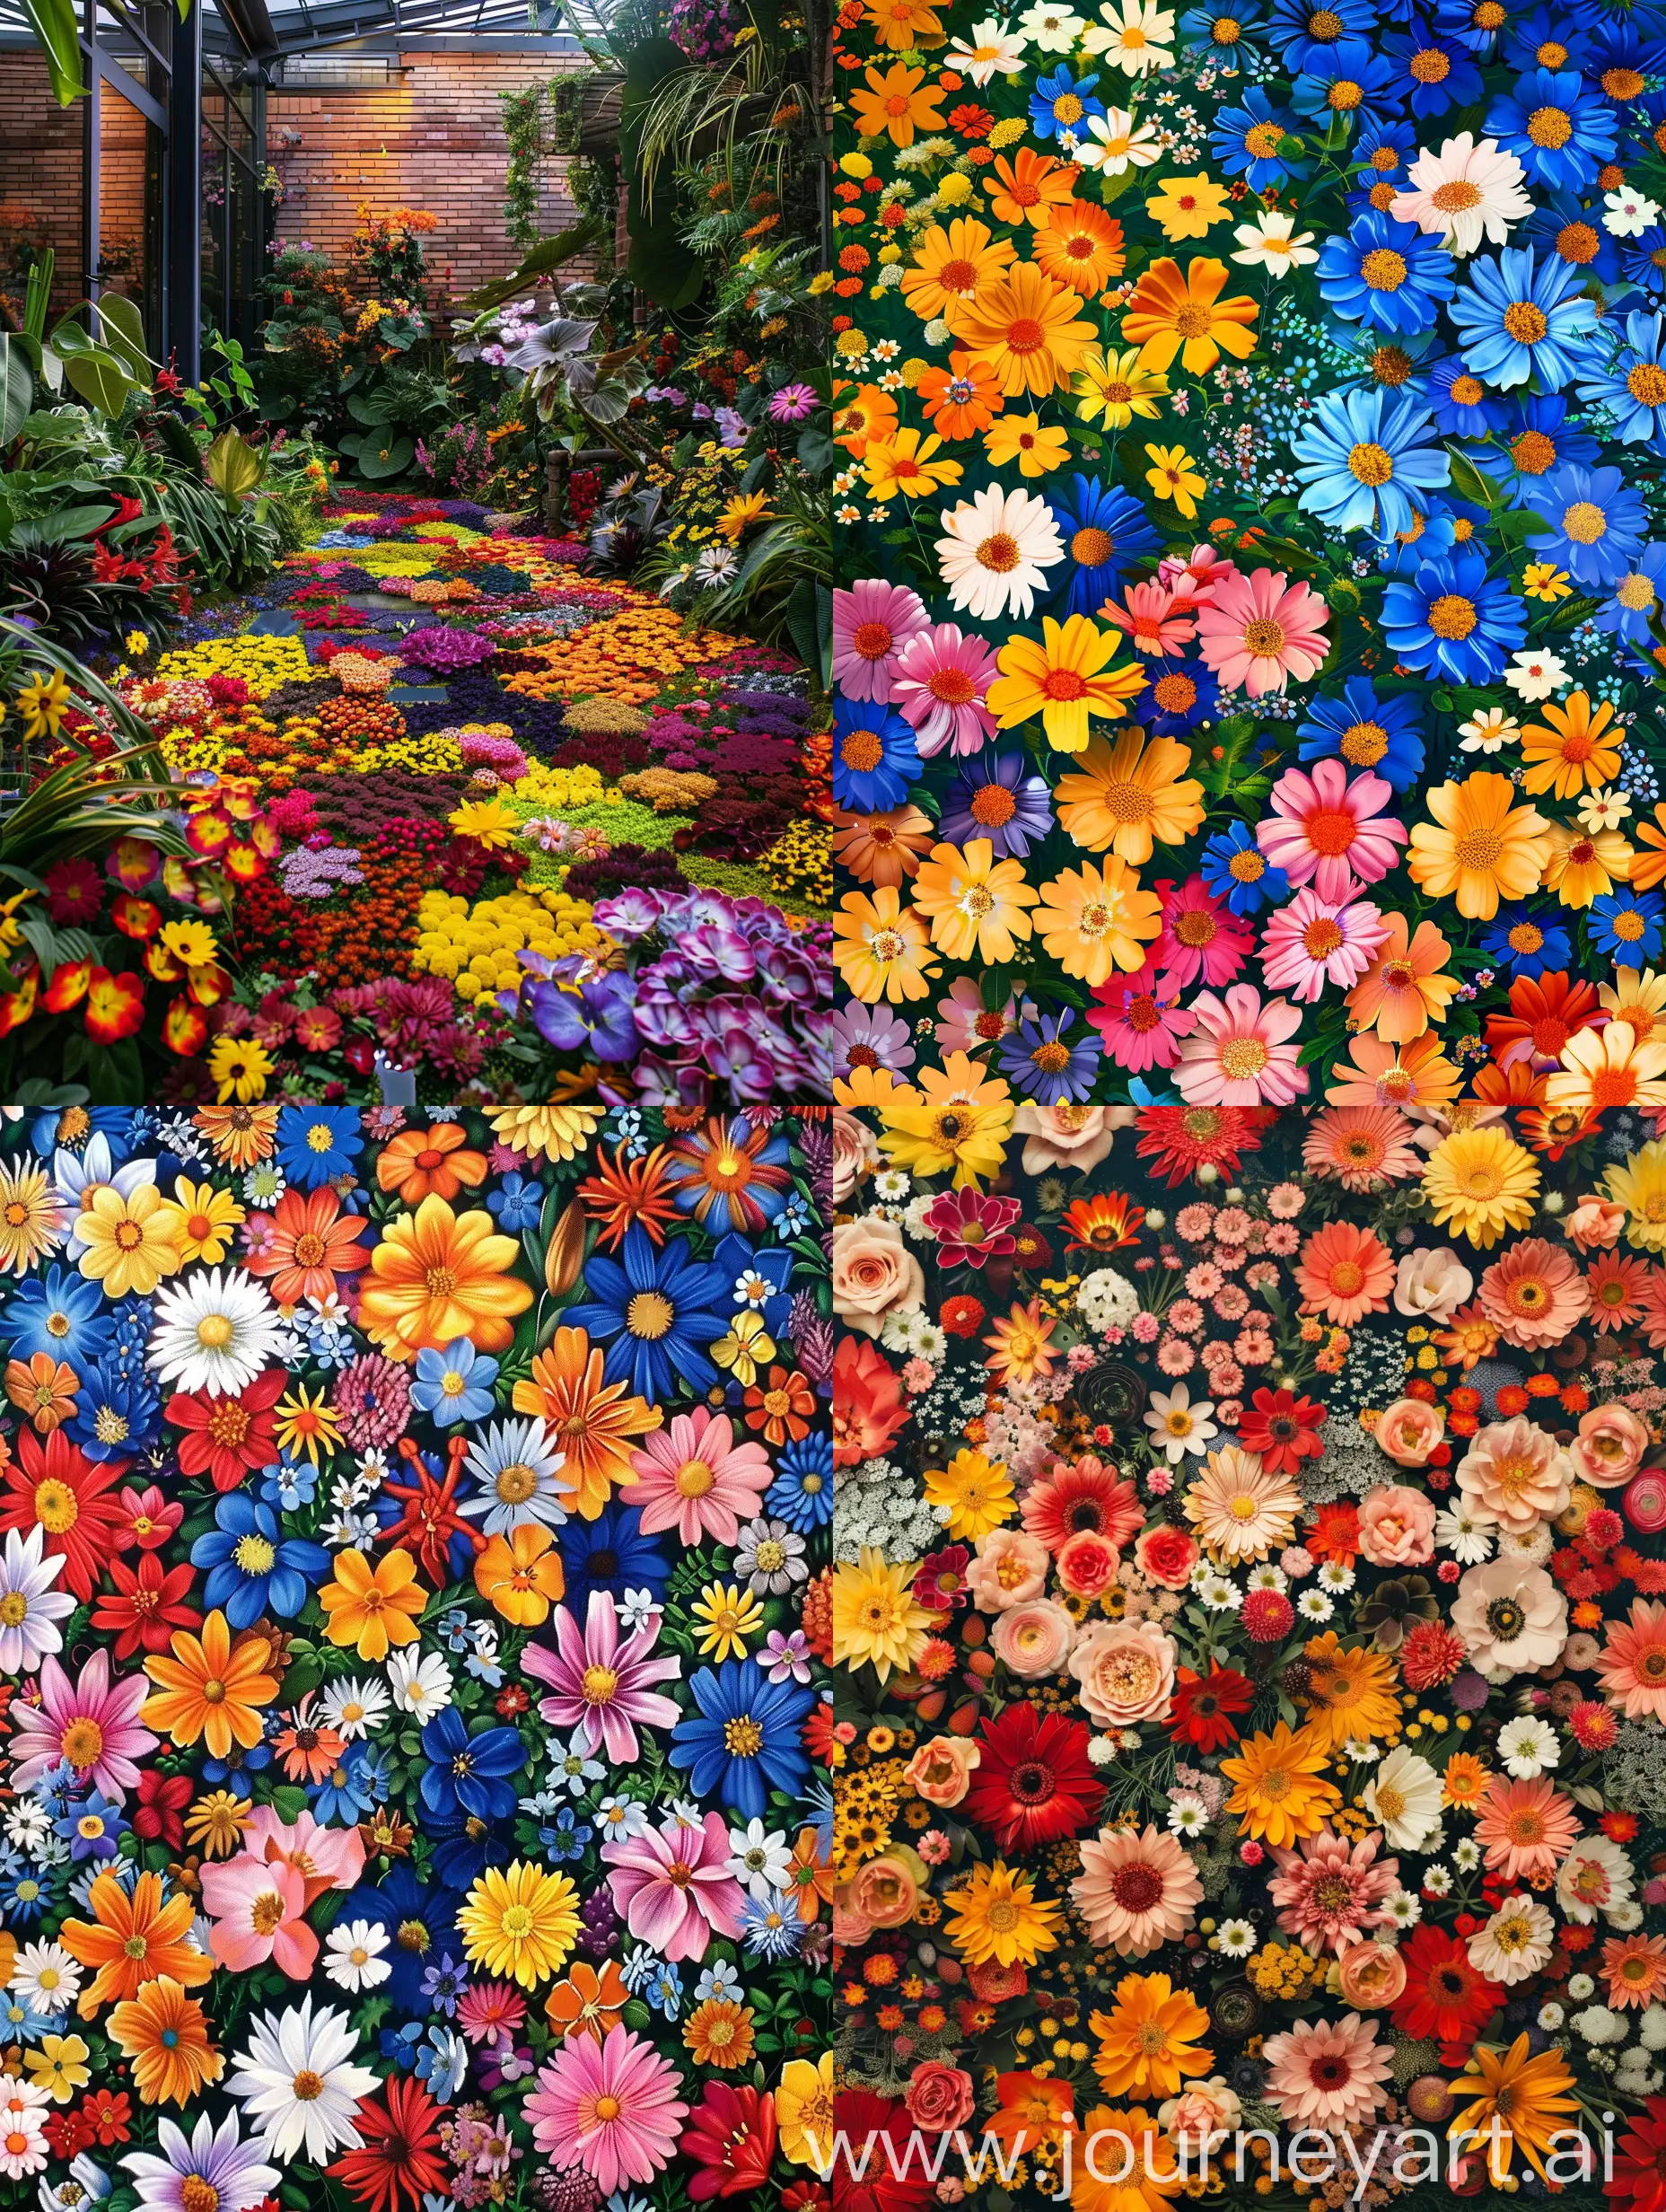 A flower carpet that is designed as a pixel